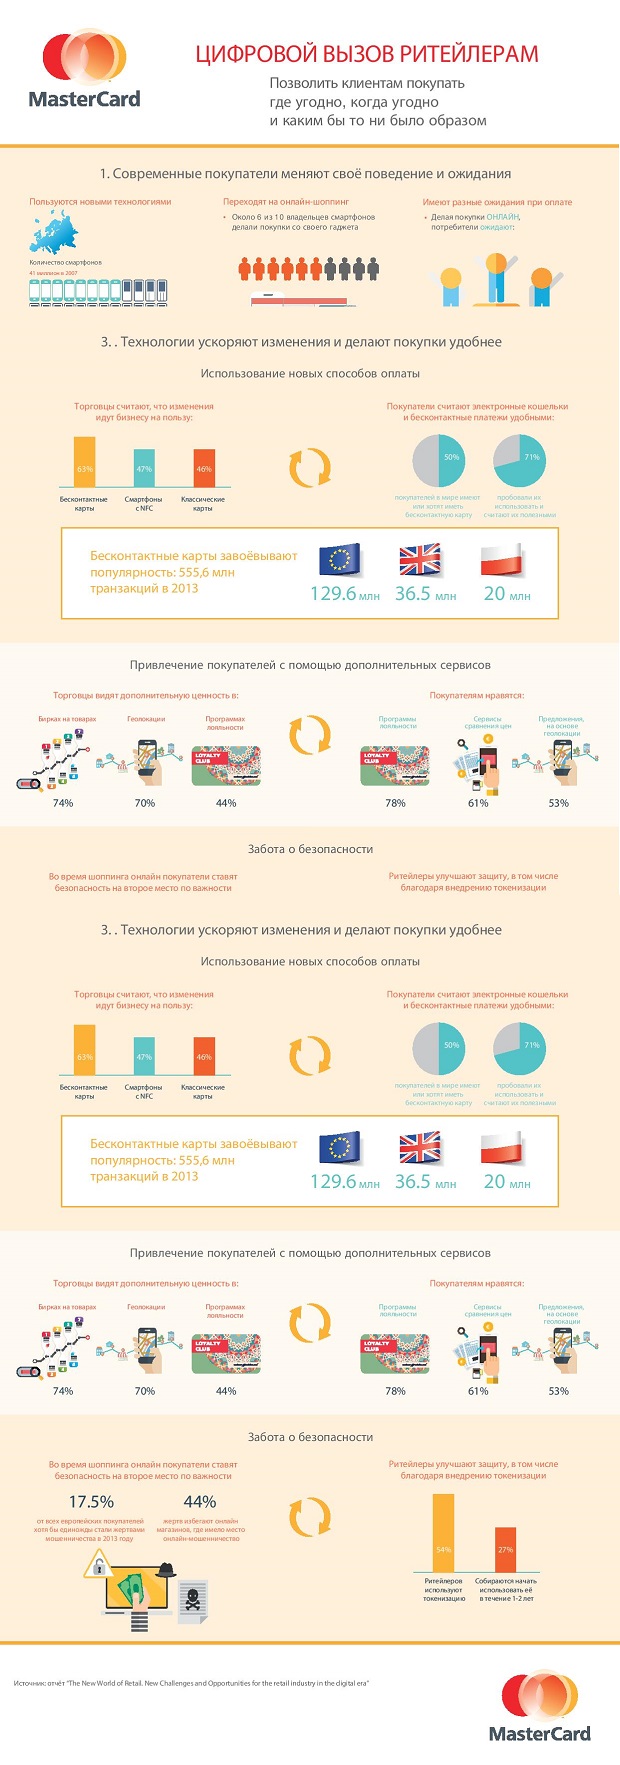 MasterCard_Innovalue_infographic_Ru2